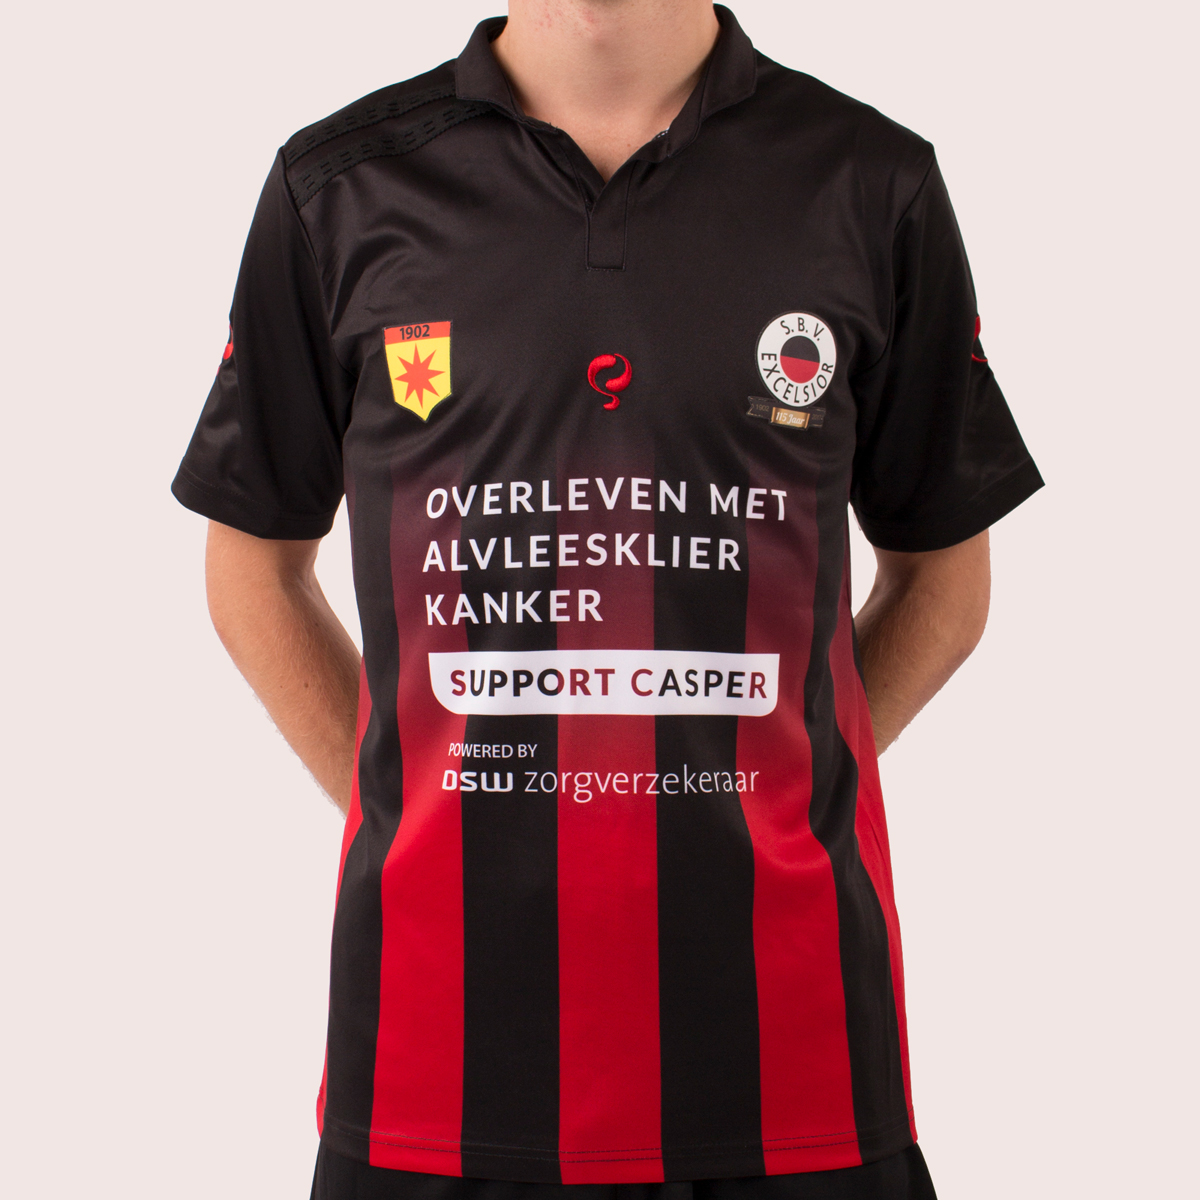 Paine Gillic Bourgeon expeditie Excelsior voetbalshirts 2017-2018 - Voetbalshirts.com